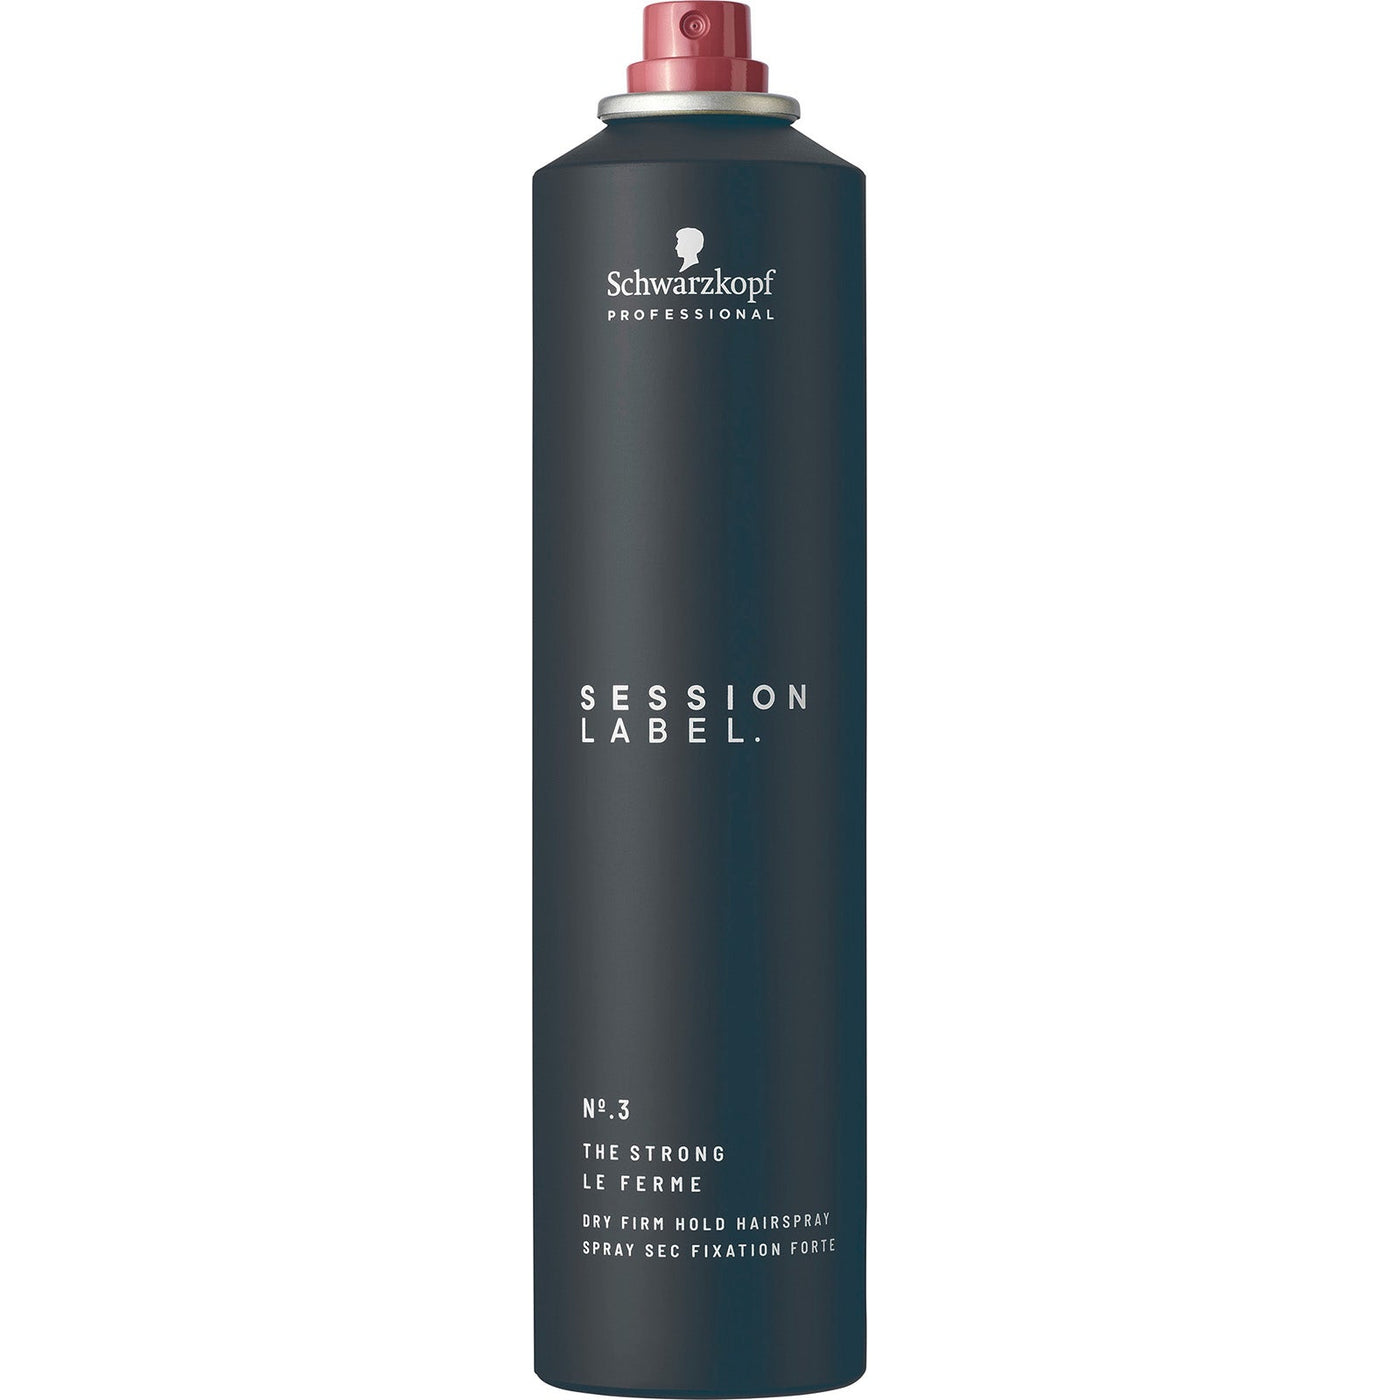 Schwarzkopf Professional Session Label The Strong (500ml) cap off